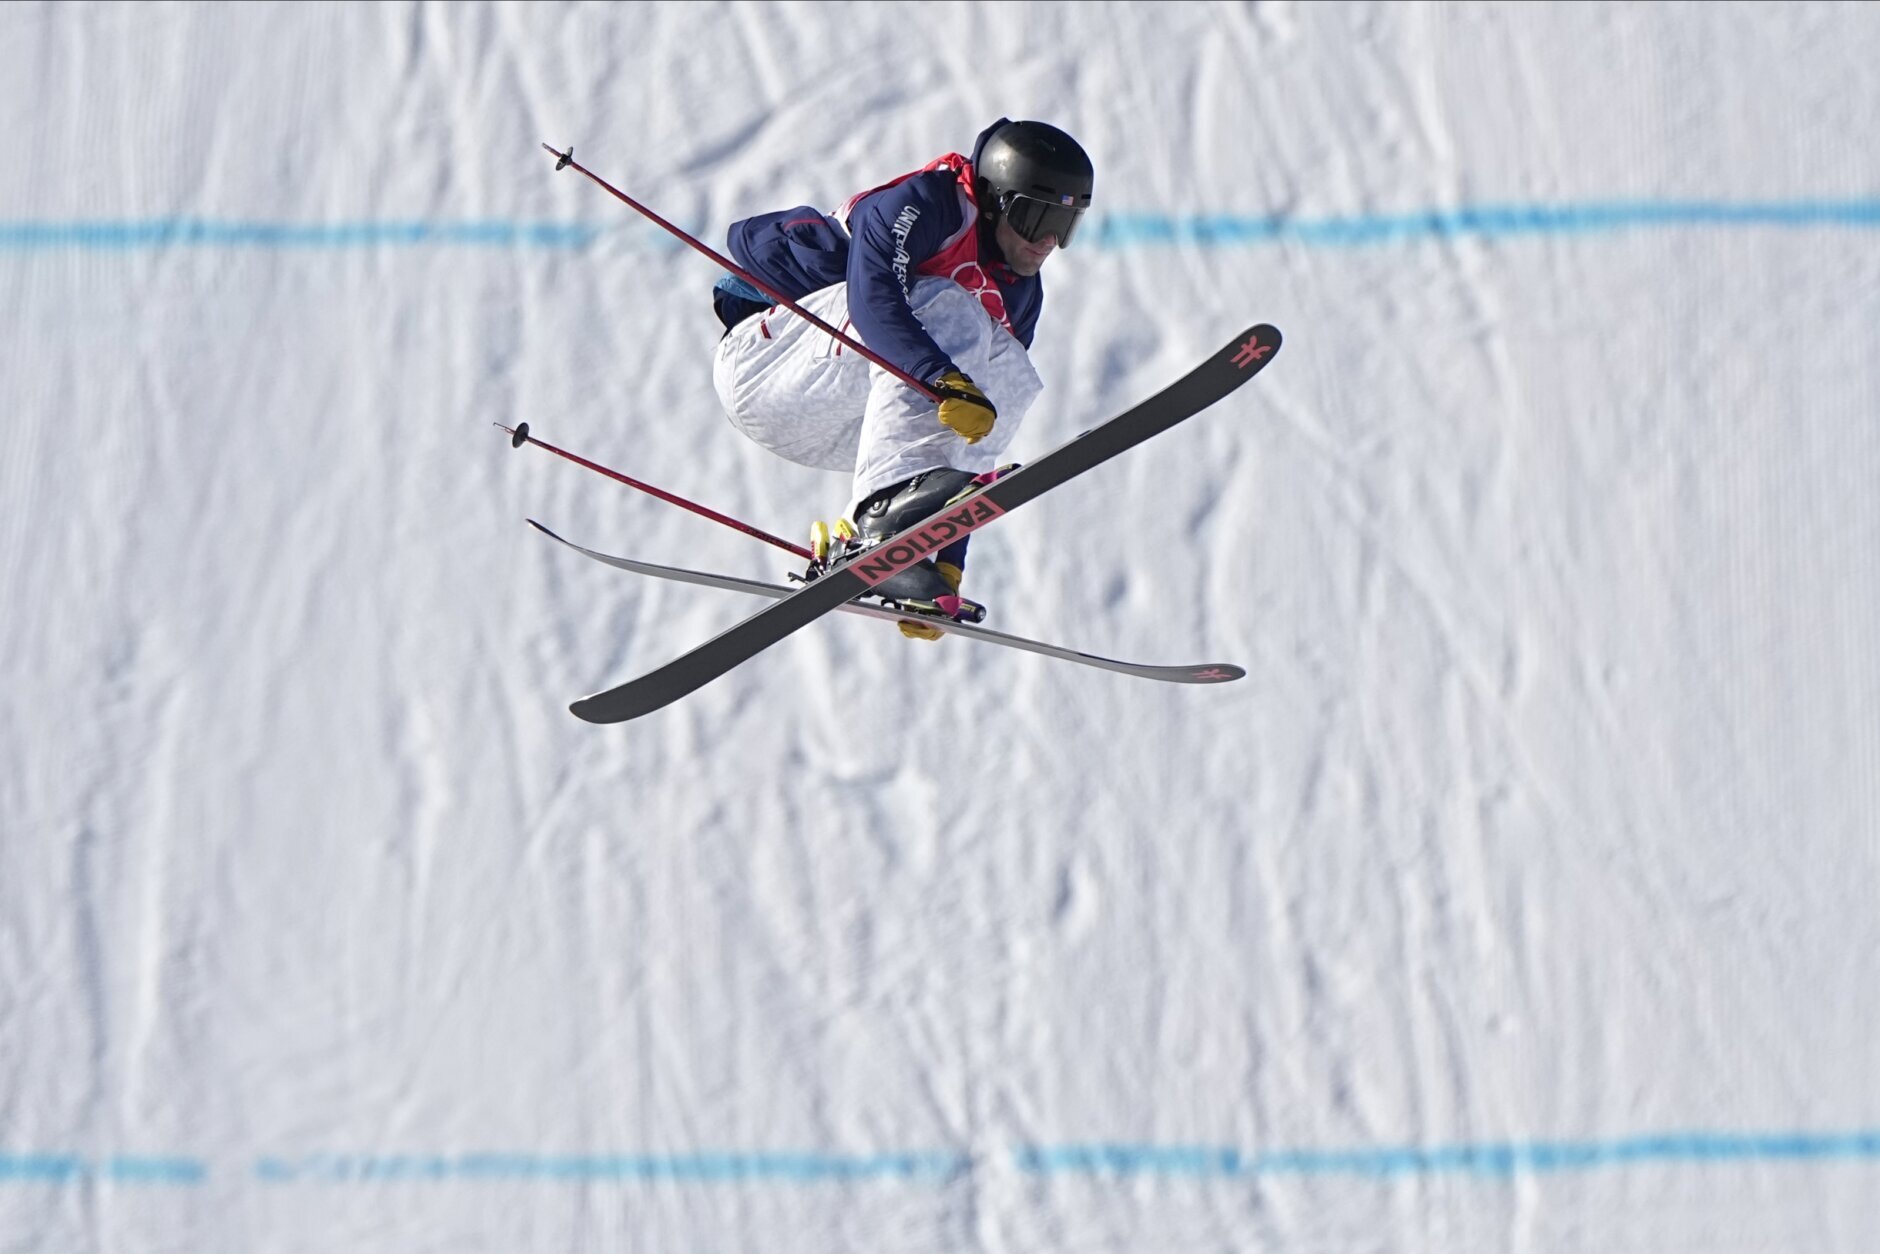 <p>United States&#8217; Alexander Hall competes during the men&#8217;s slopestyle finals at the 2022 Winter Olympics, Wednesday, Feb. 16, 2022, in Zhangjiakou, China.</p>
